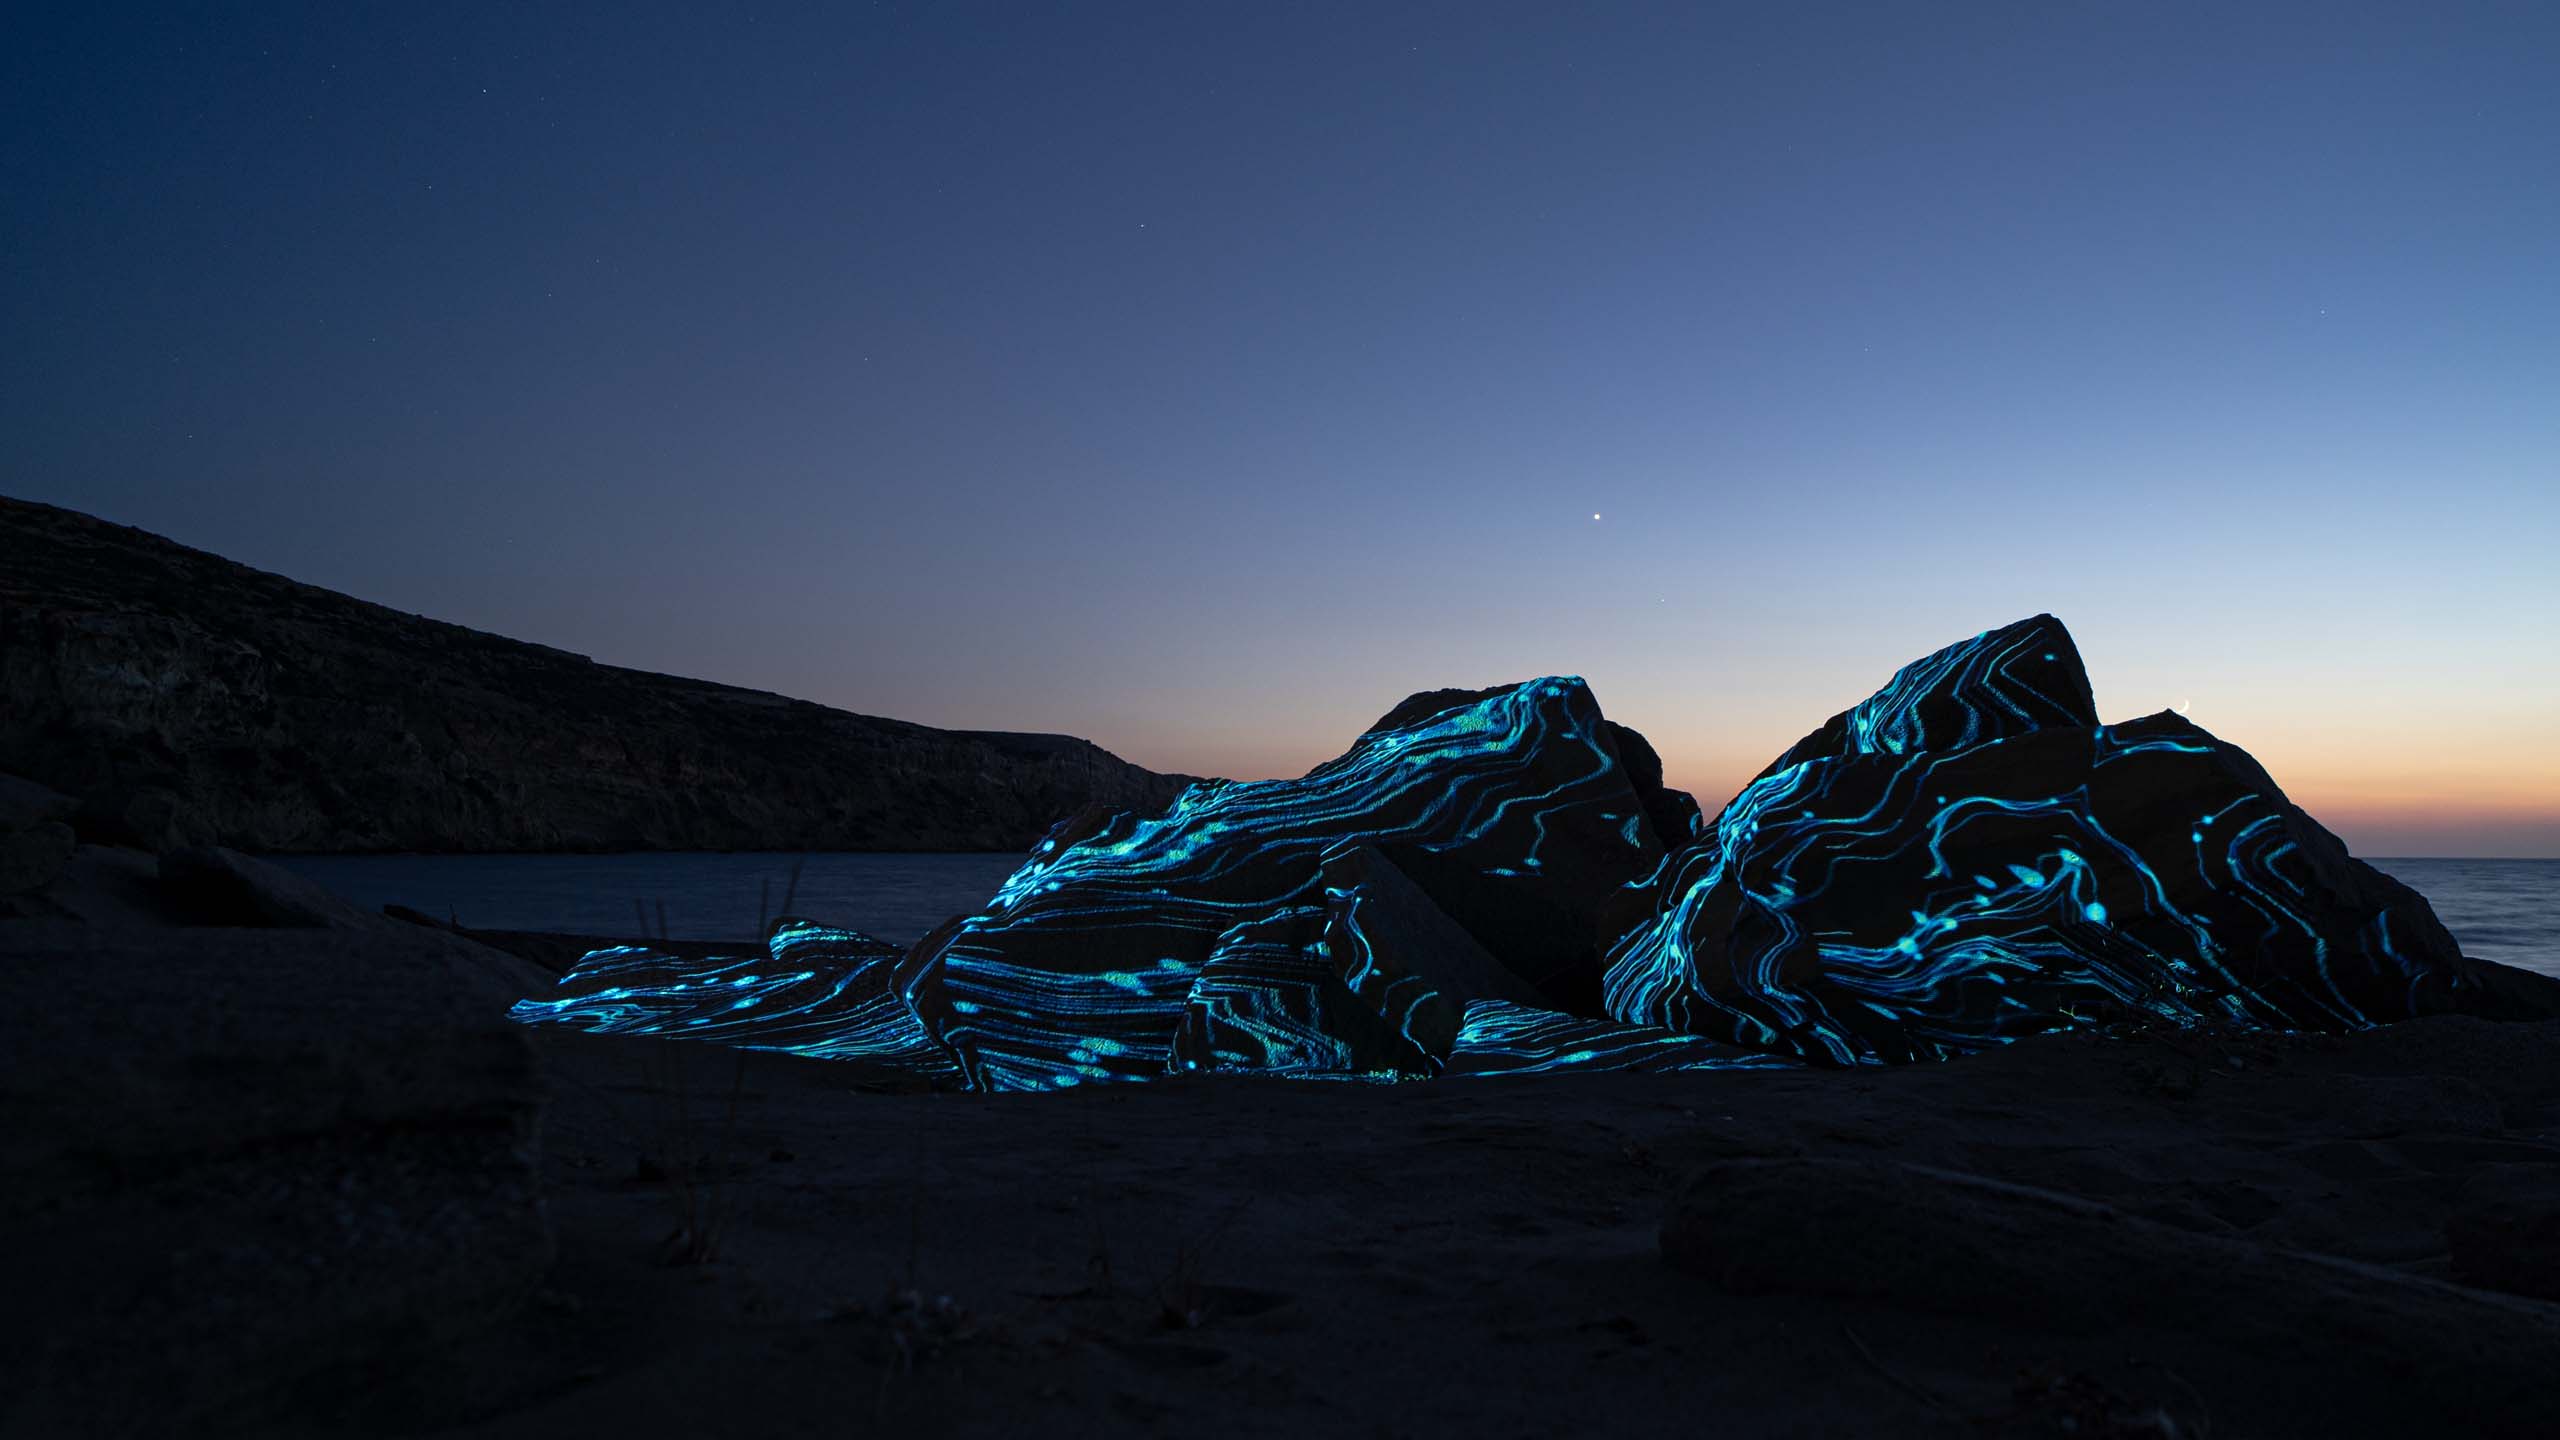 Projection Mapping in nature on a rock